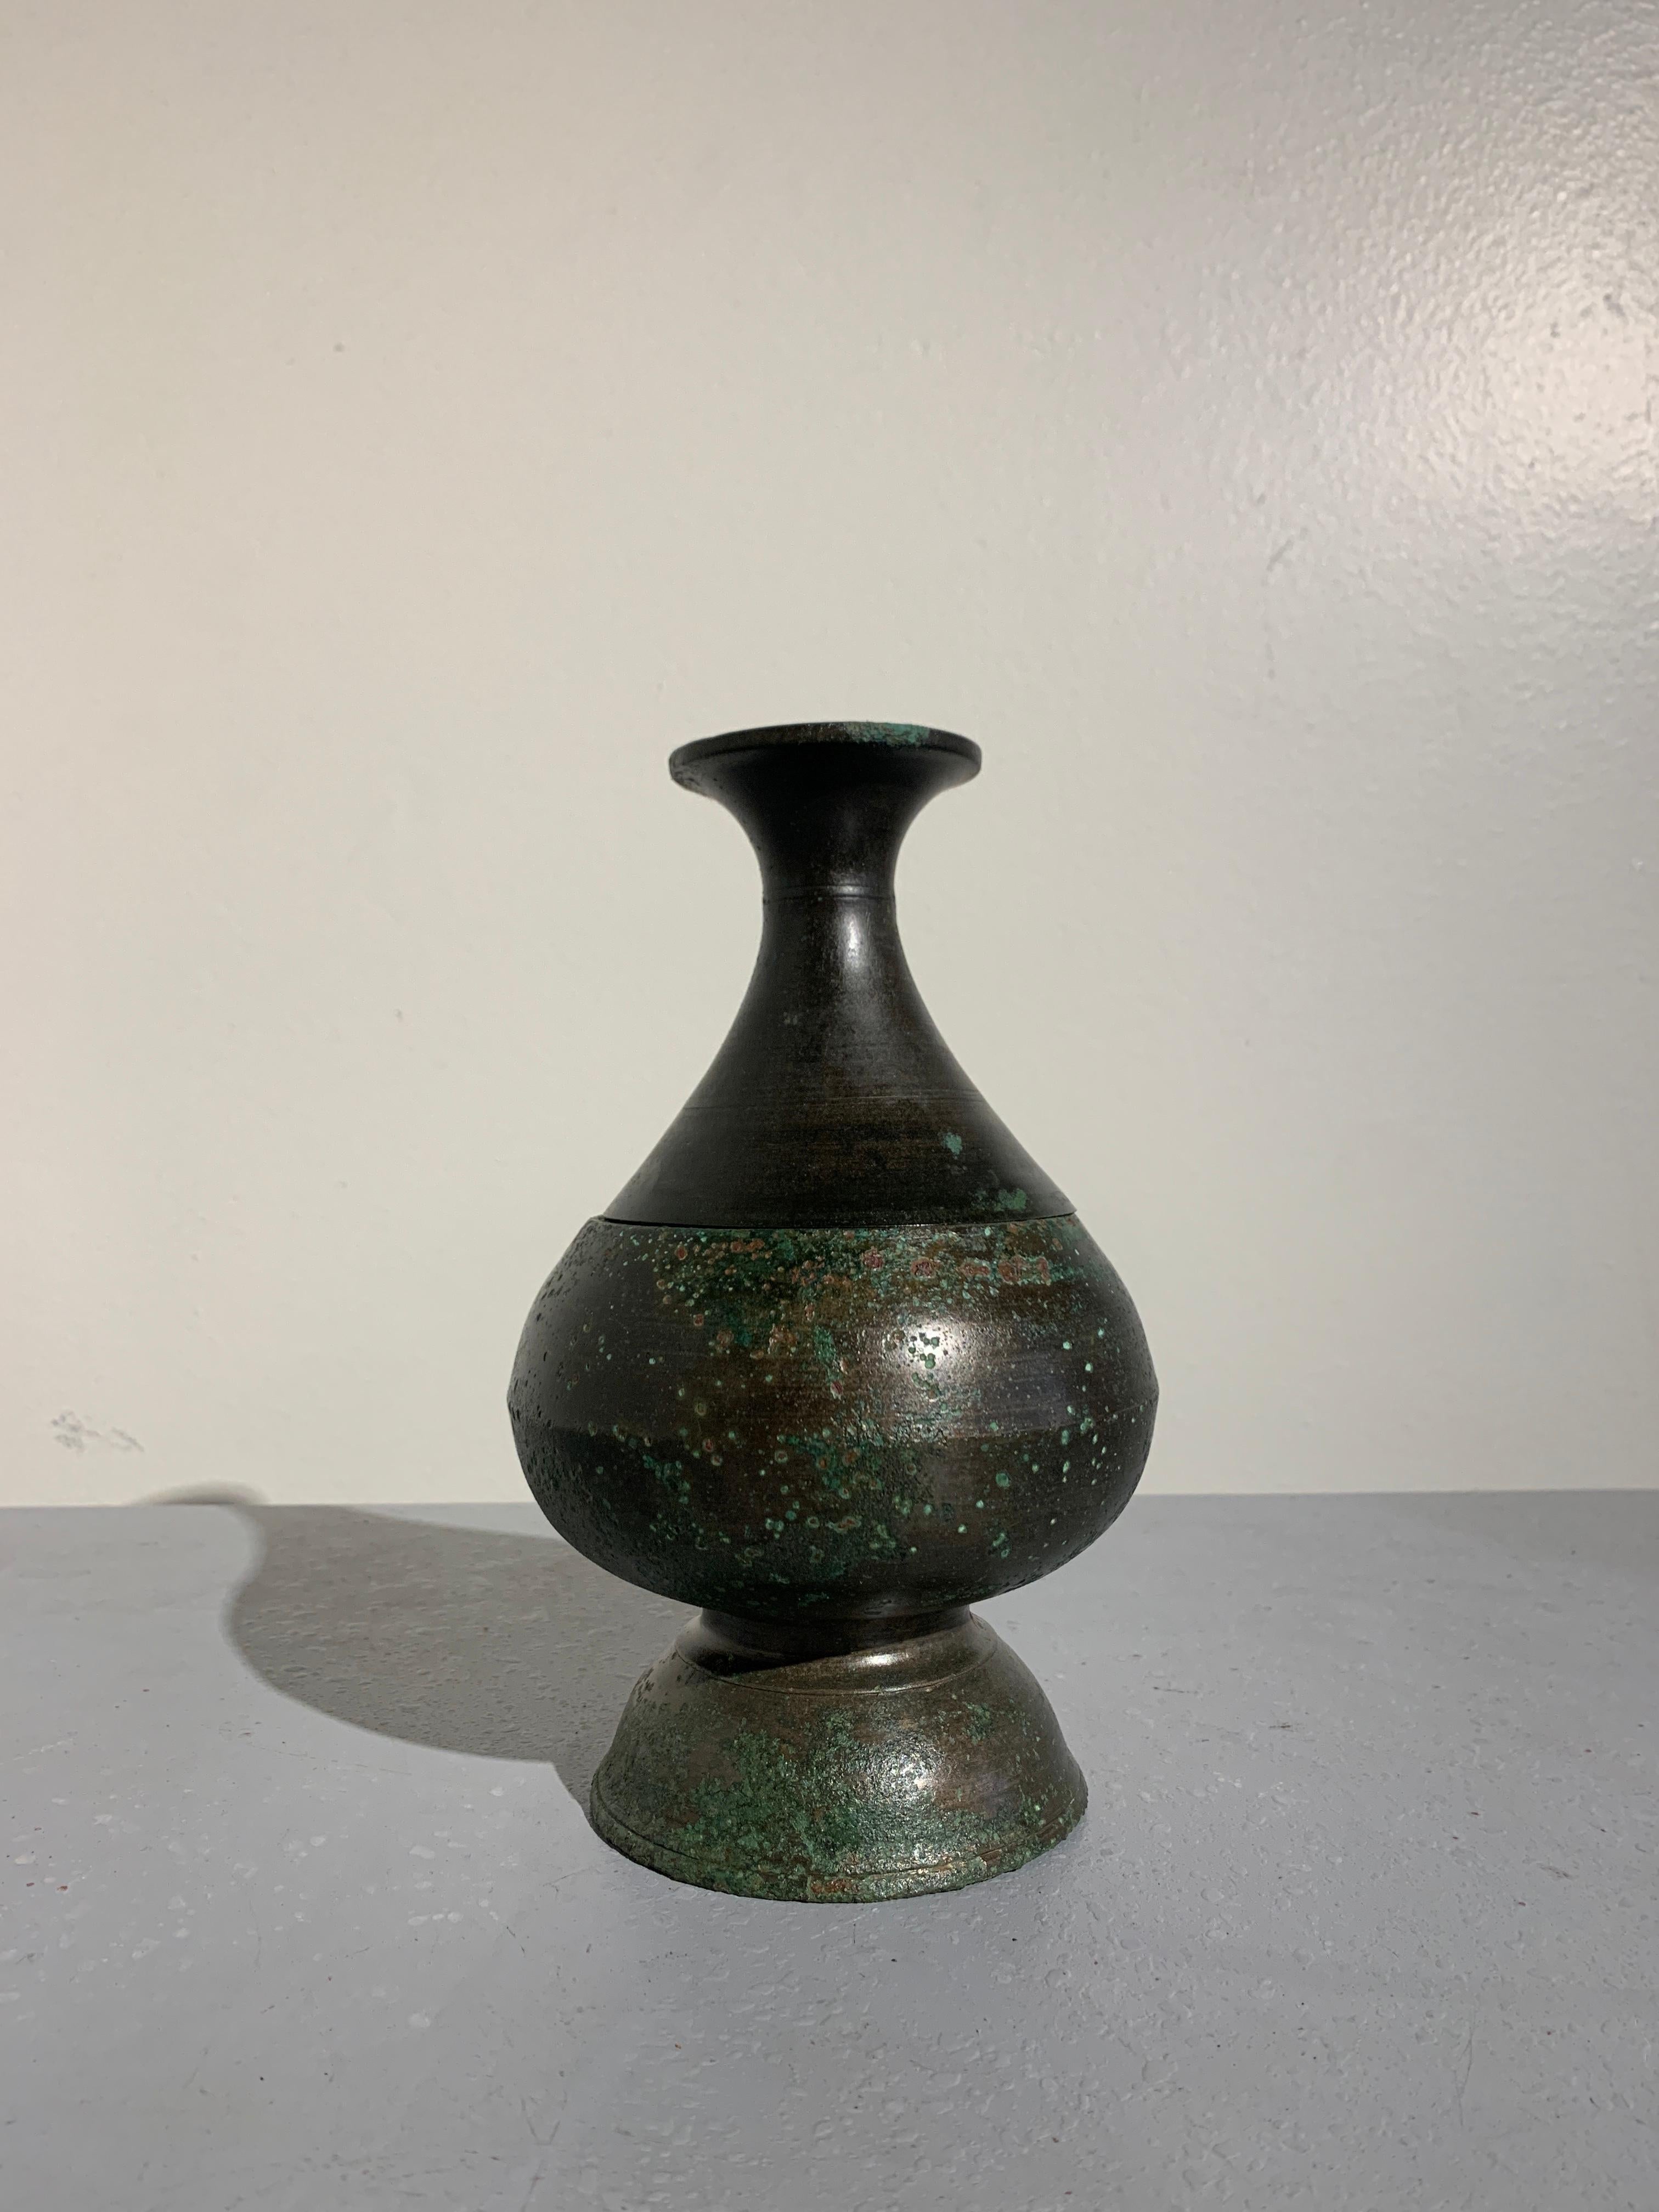 An elegant Khmer pear shaped bronze bottle vase, Angkor Period, 12th-14th century.

Crafted of bronze in two parts. When separated, the lower portion of the vase becomes an offering vessel with a pedestal foot, while the upper portion becomes a